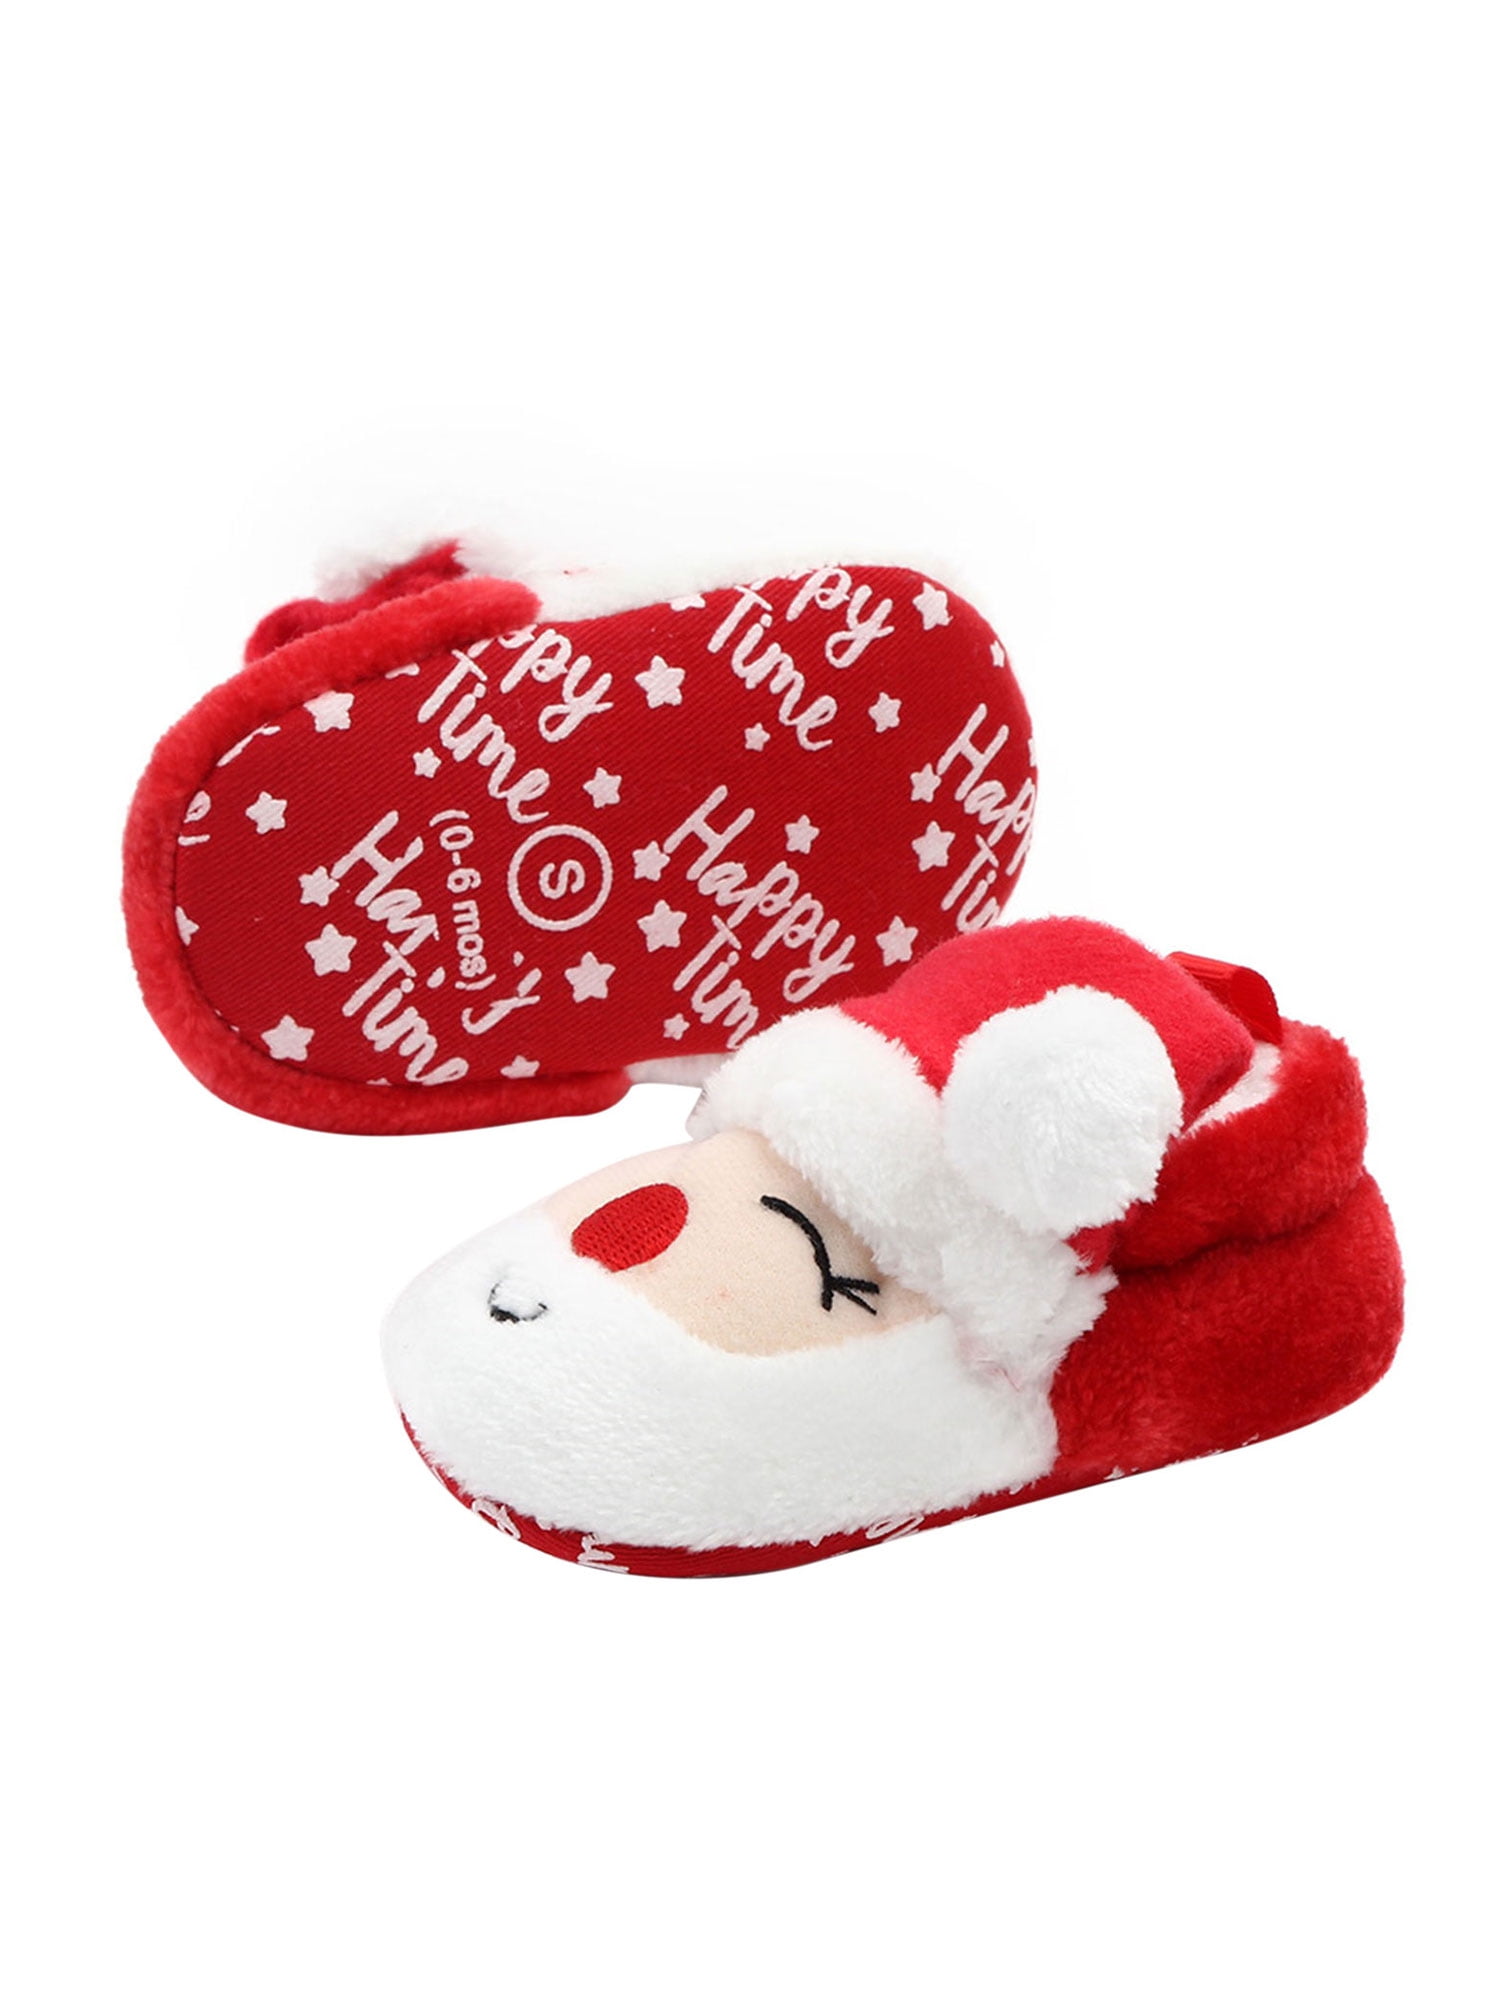 Toddler Christmas Slippers Infant Kids Baby Santa Claus Elk Printed Warm Shoes Boys Girls Cartoon Christmas Red Xmas Soft Cotton Shoes 